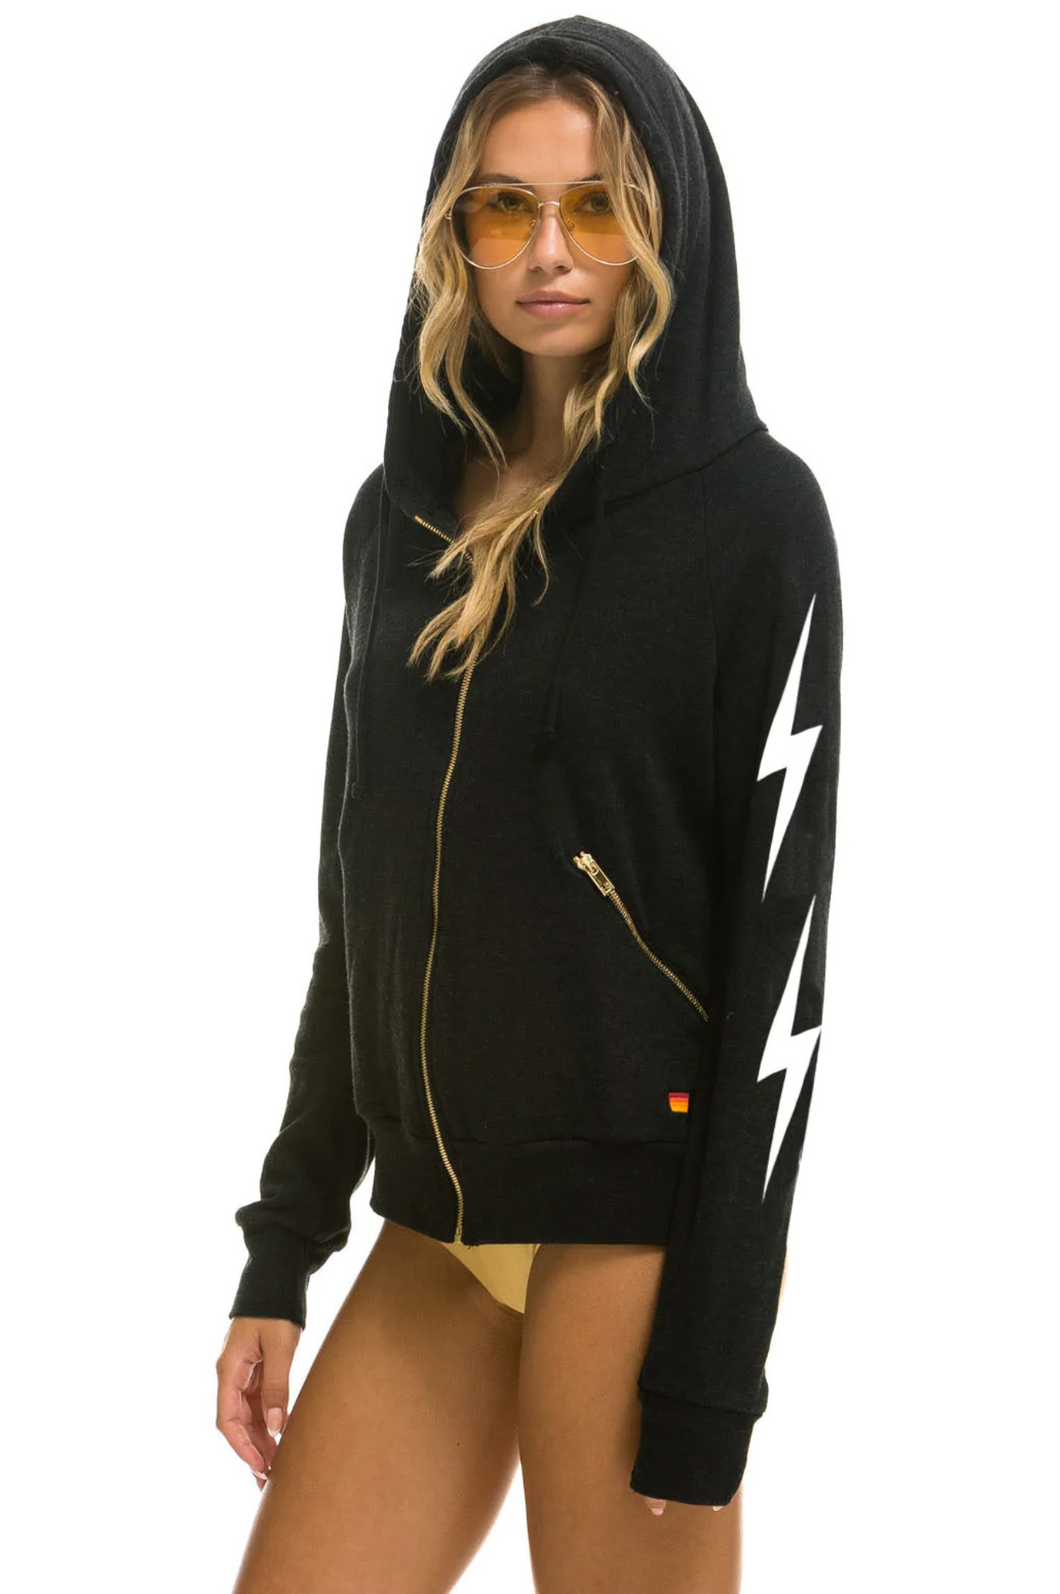 AVIATOR NATION BOLT 4 ZIP UNISEX HOODIE RELAXED WITH POCKETS - BLACK